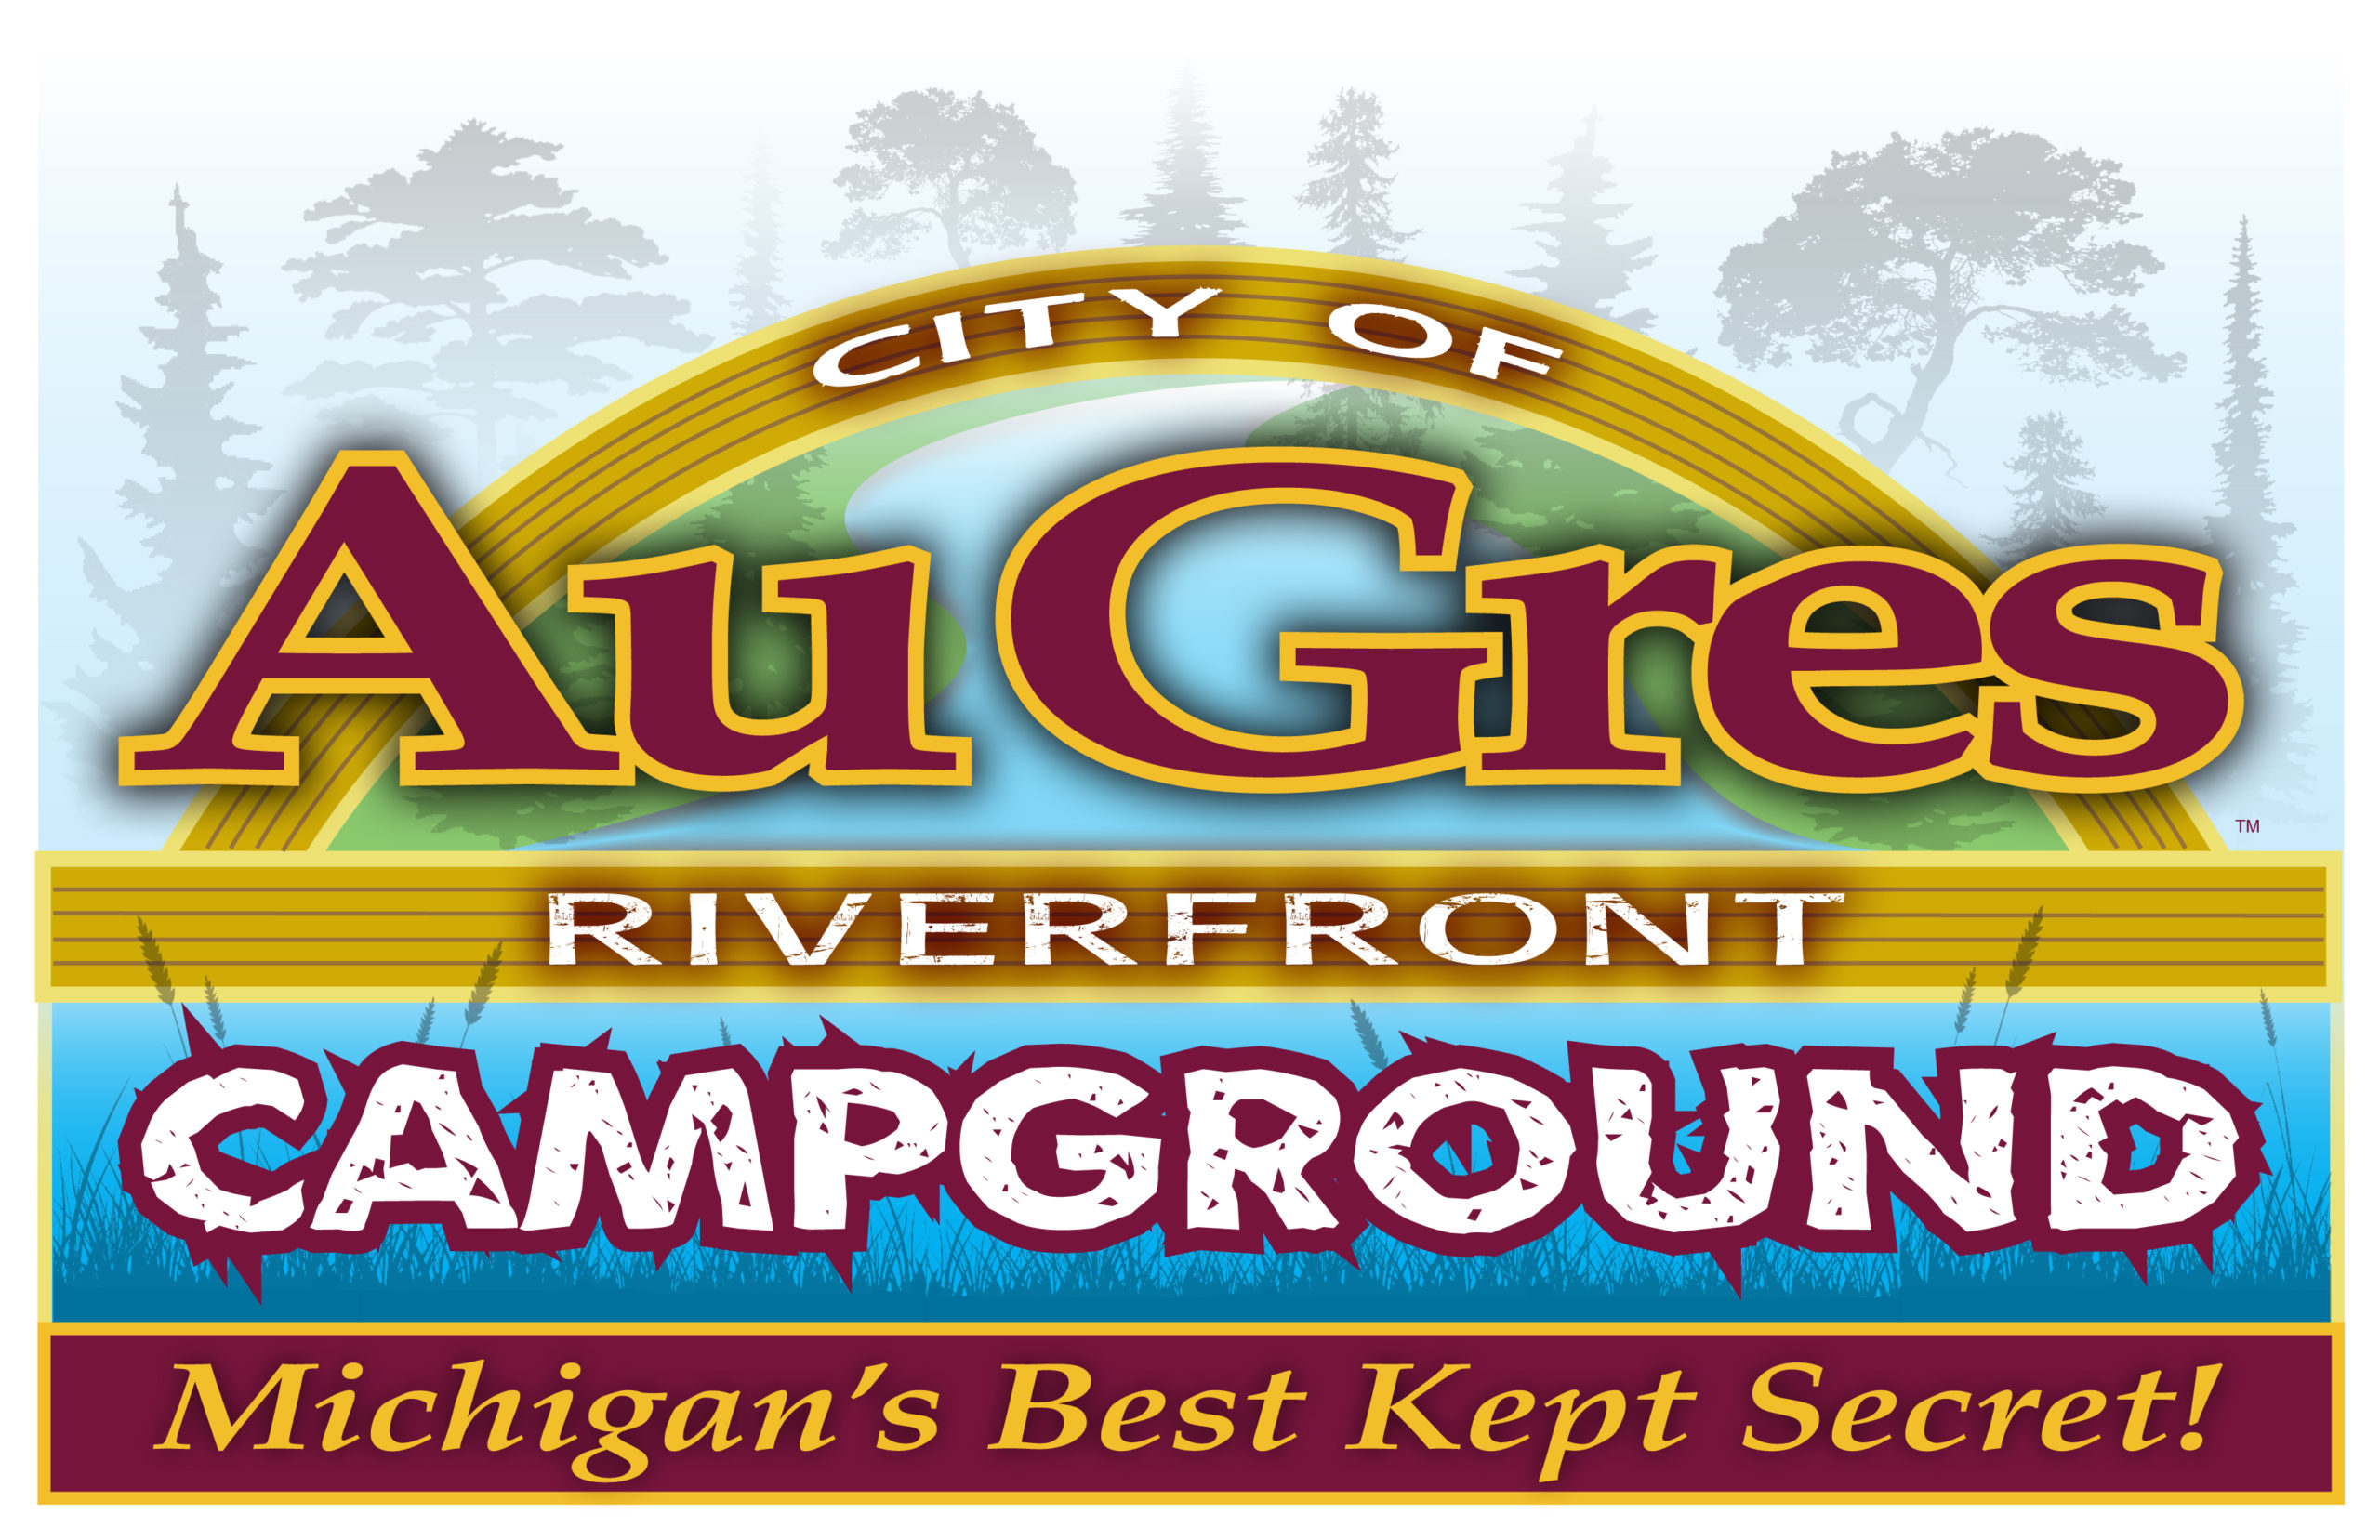 Au Gres Riverfront Campground full color logo